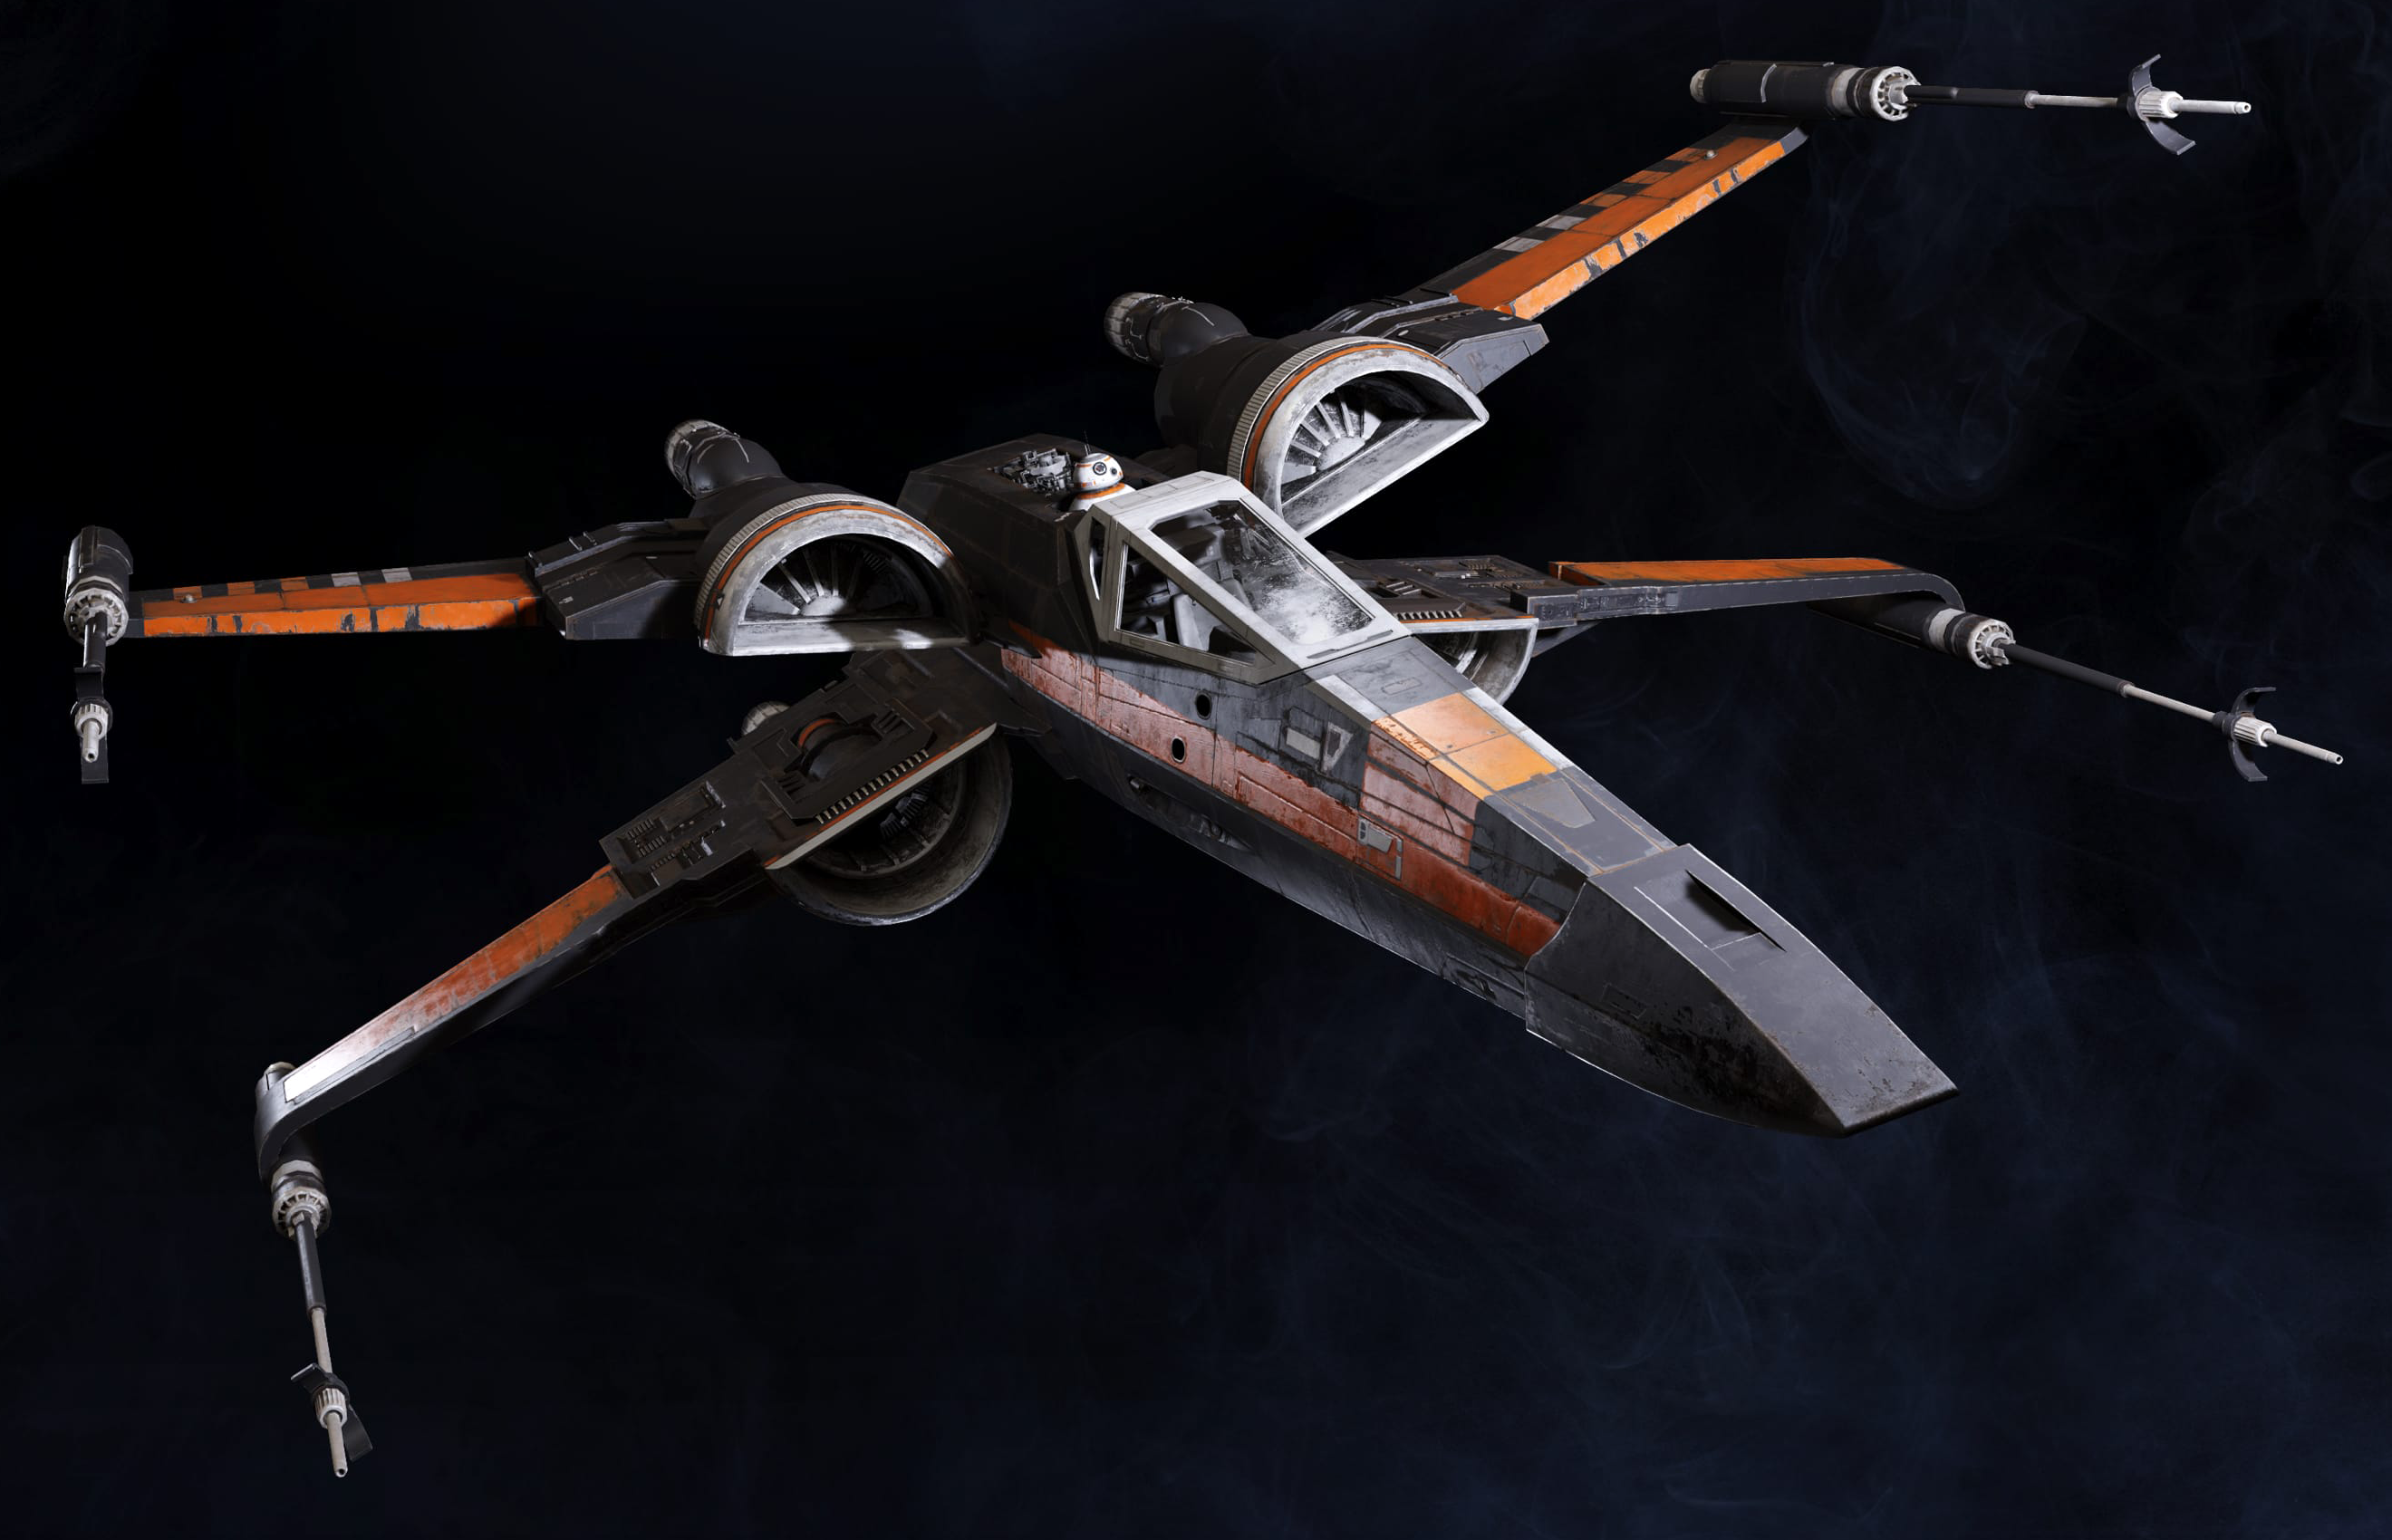 Who does this Starfighter belong to?